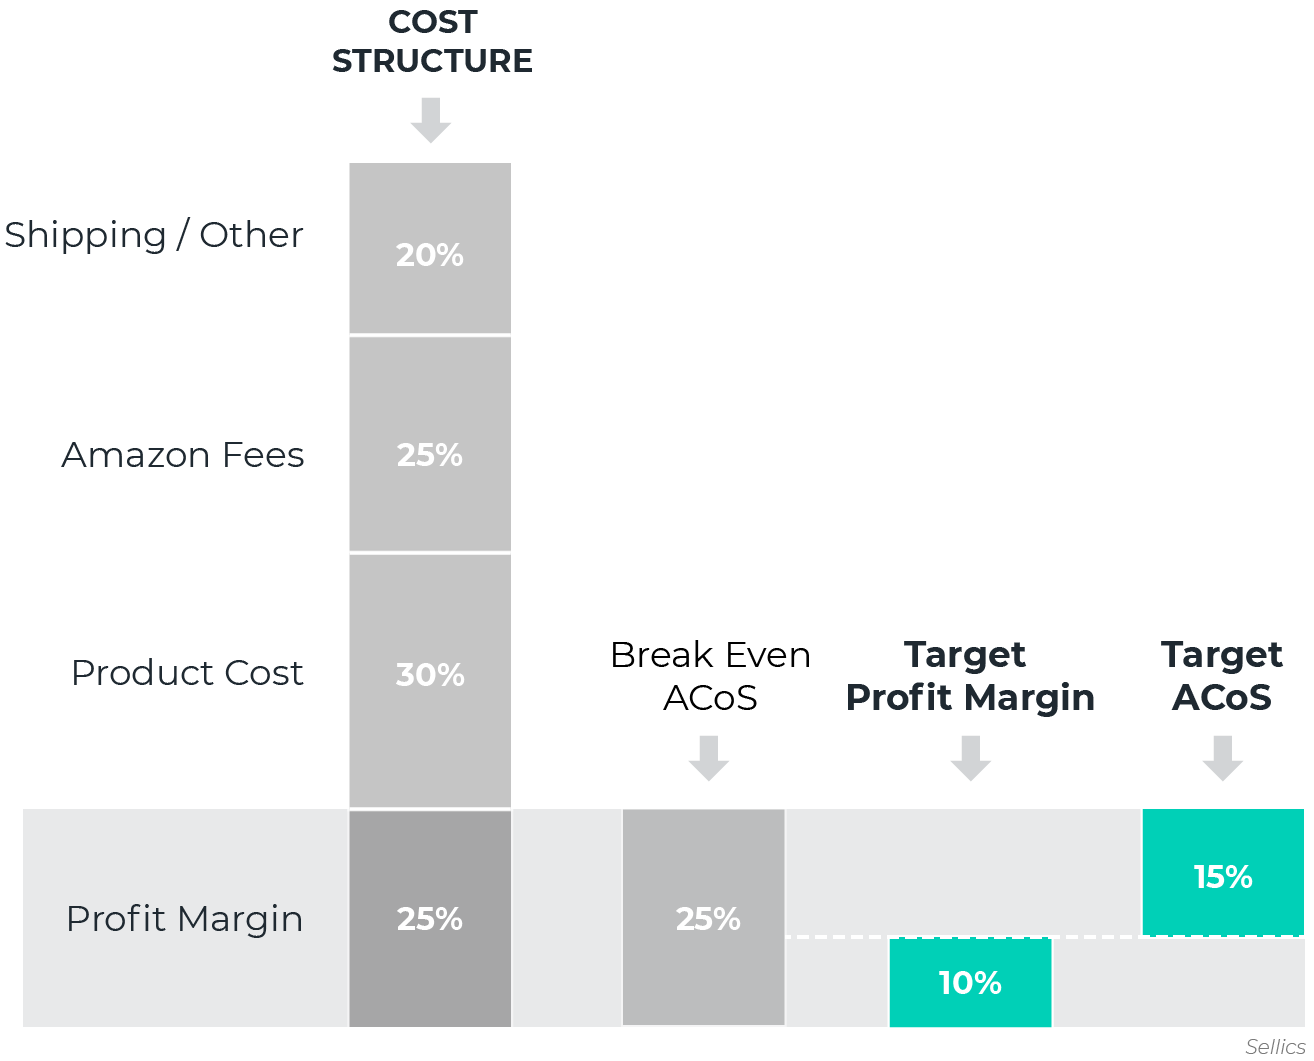 Cost-structure-target-profit-margin-and-target-Acos